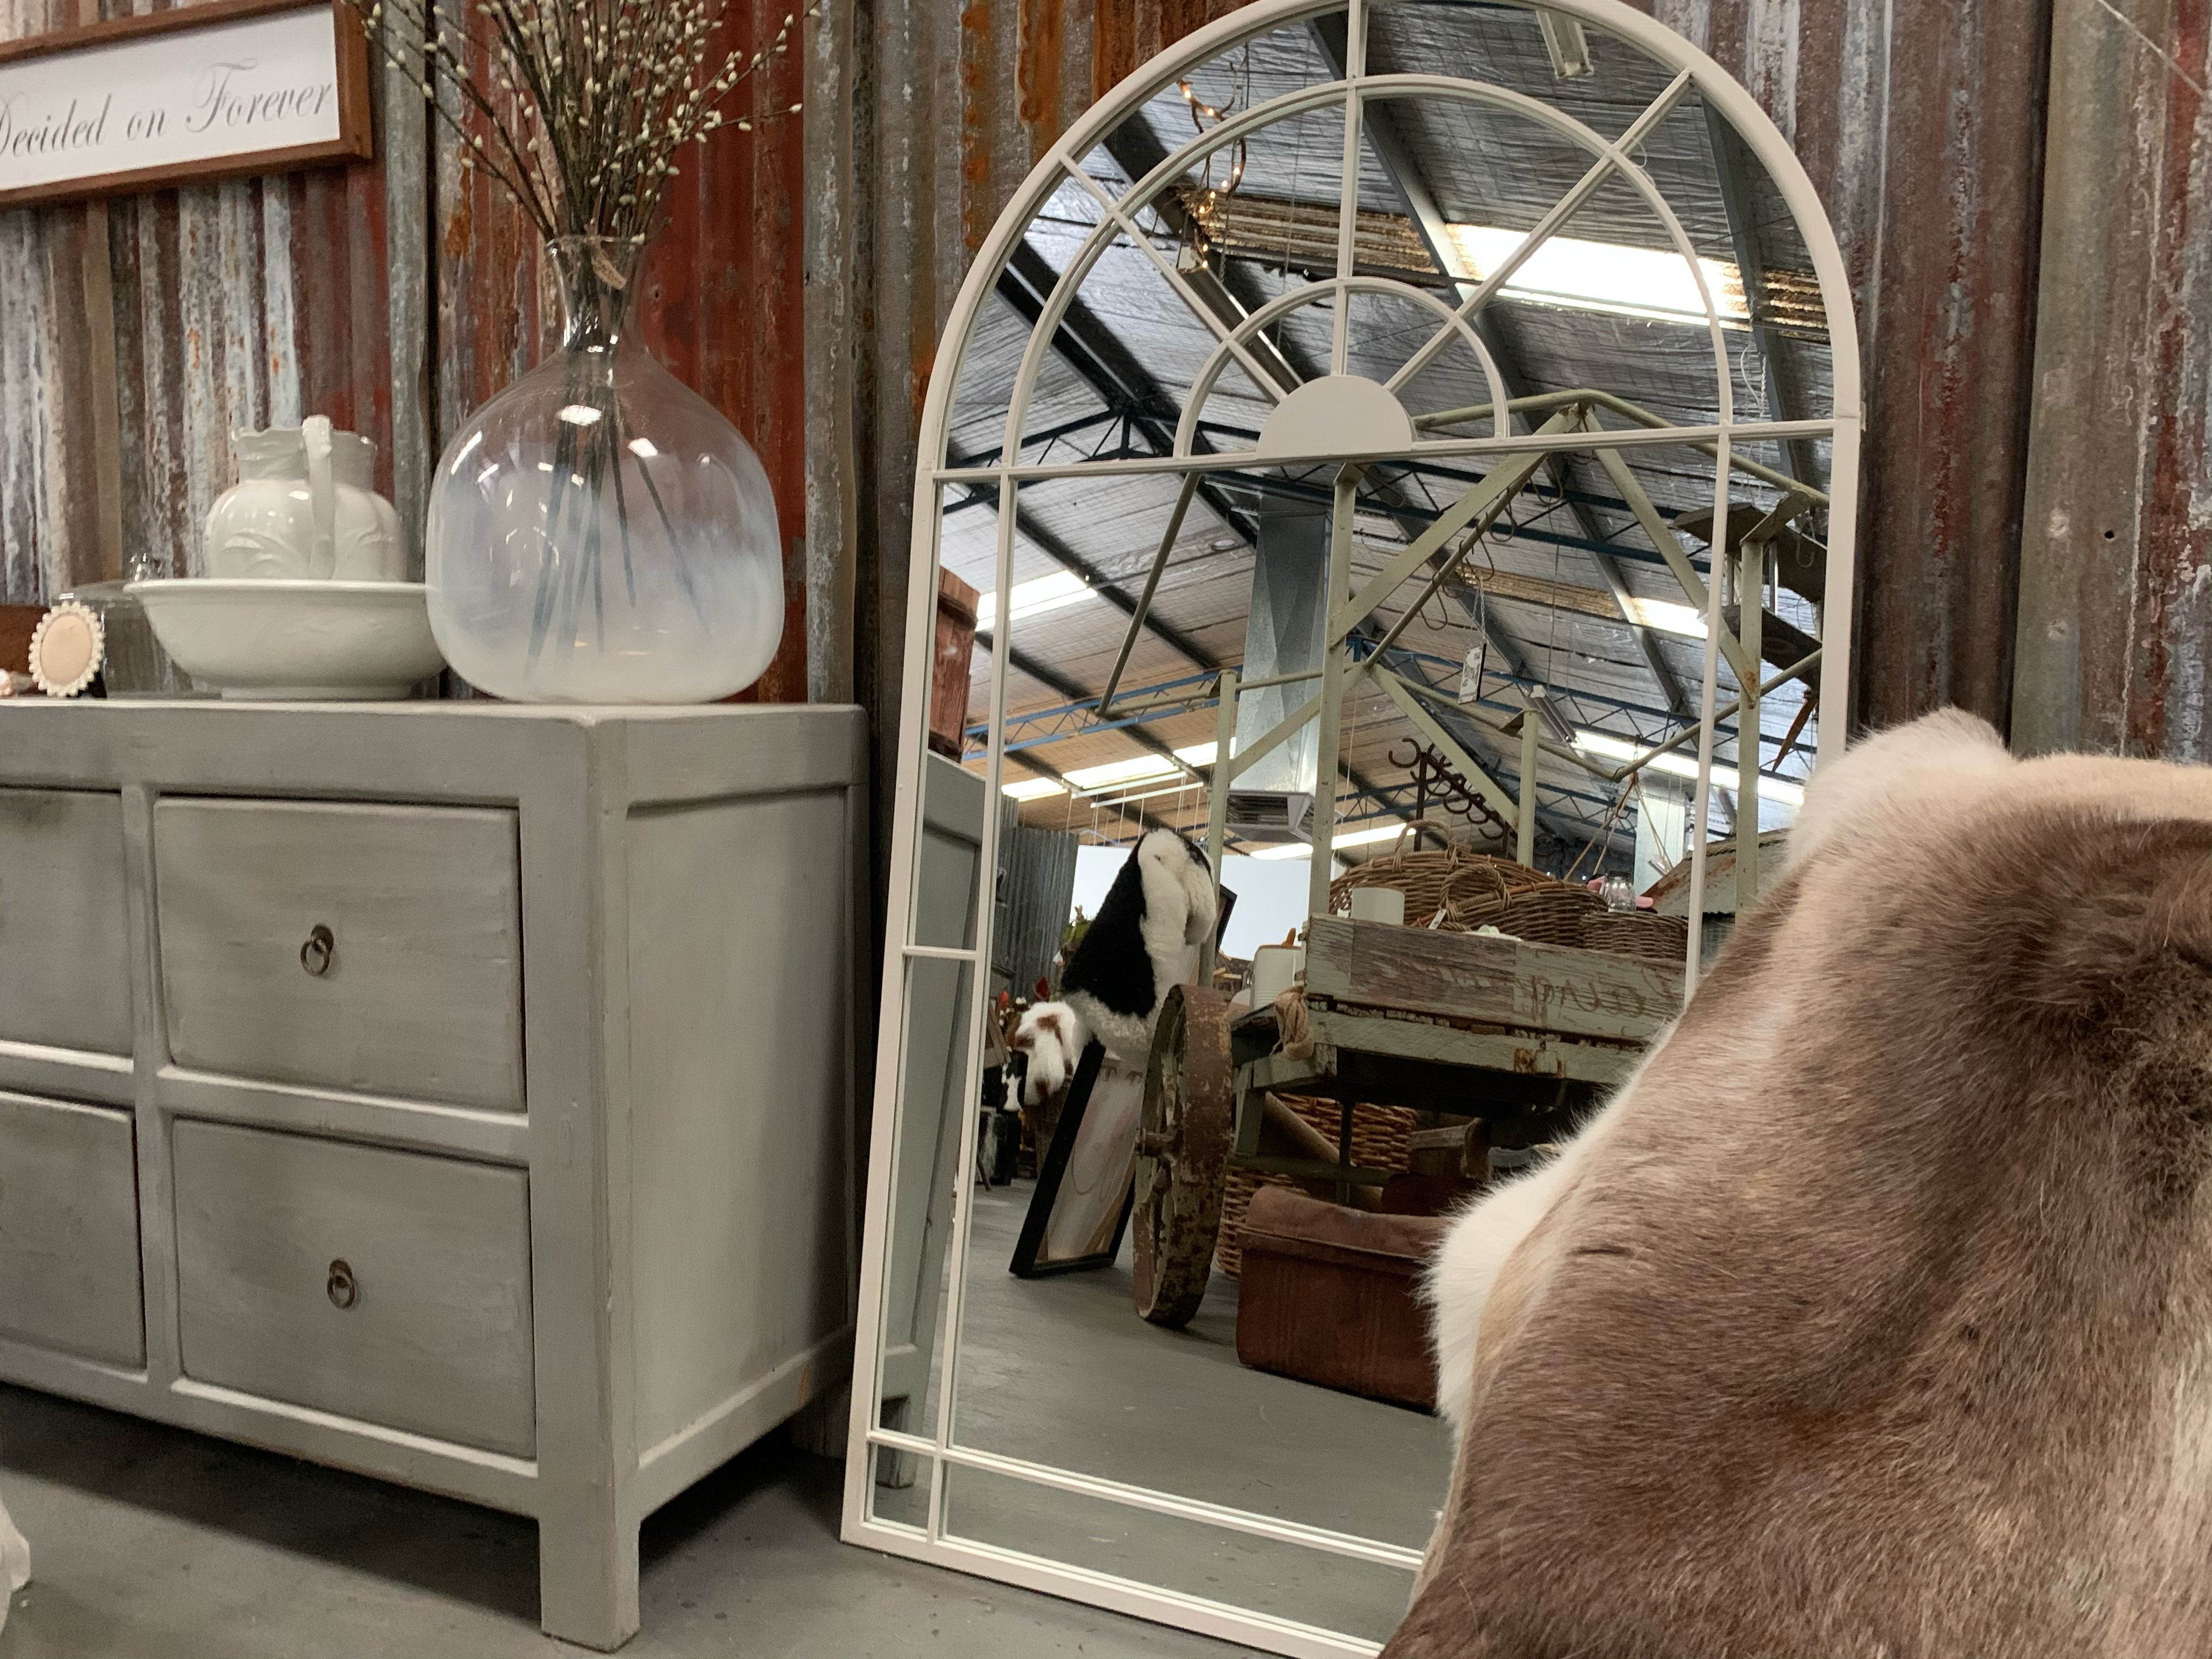 Beautiful white arched mirror